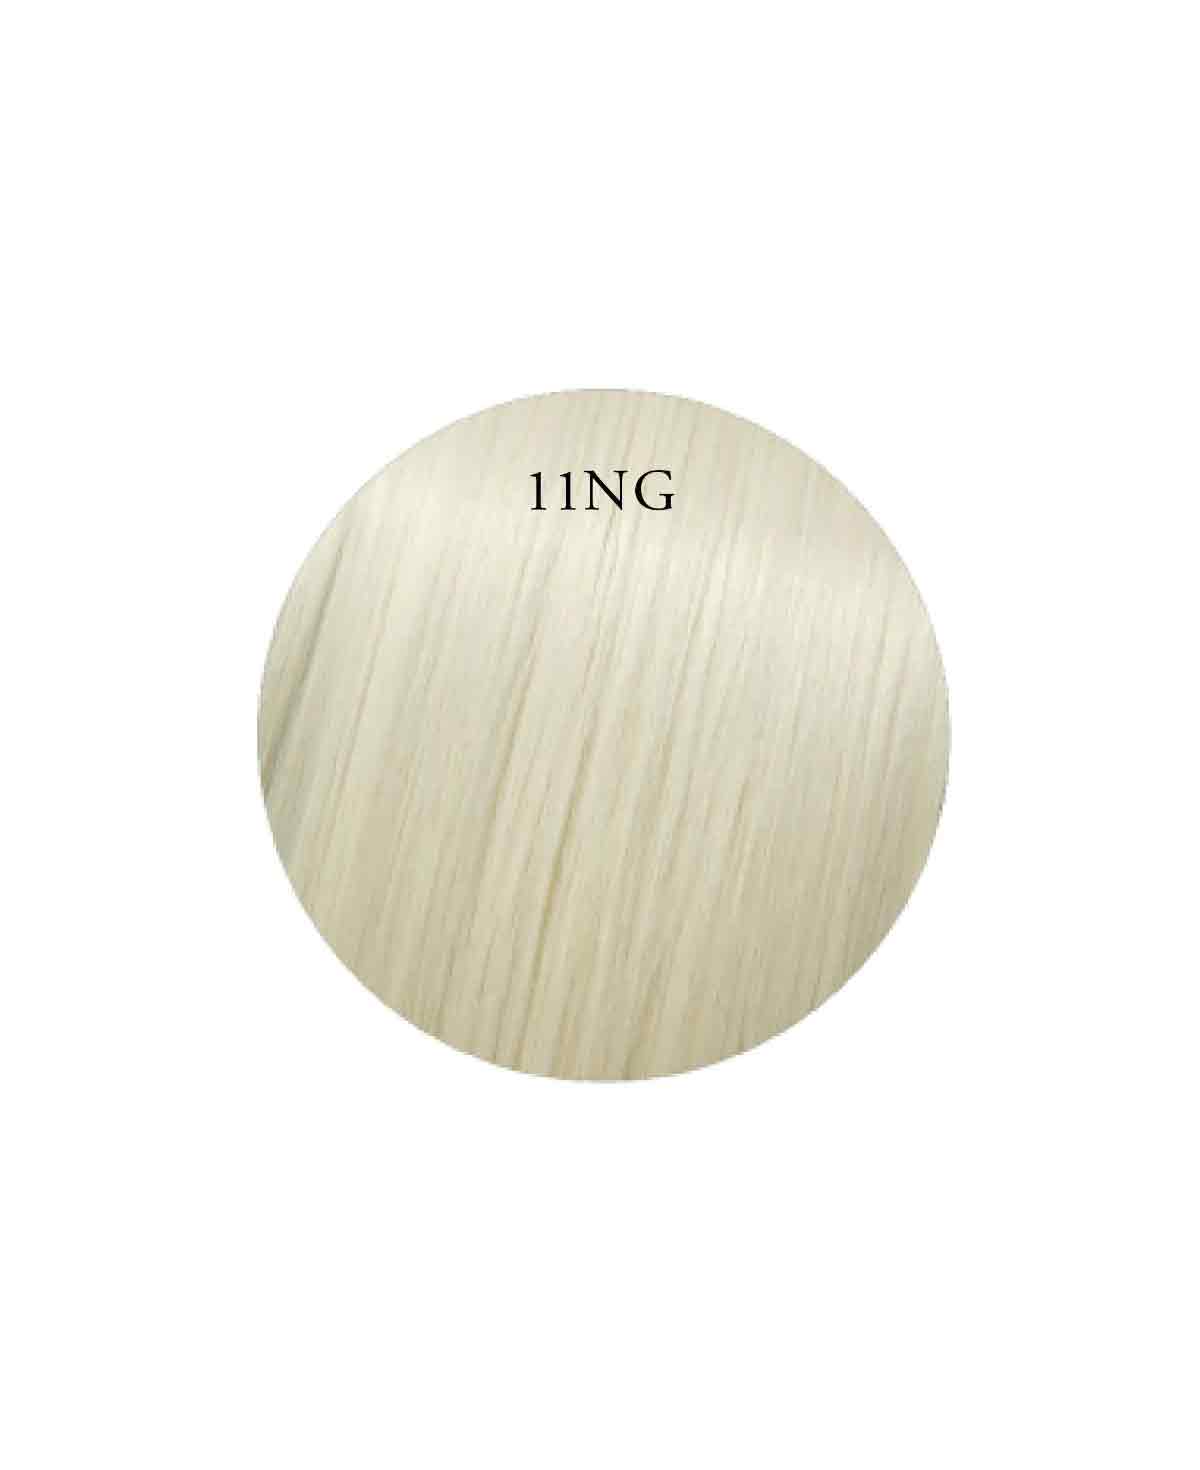 30-35cm (14") SKIN WEFT HAIR-EXTENSIONS - SILVER BLONDE - 11NG